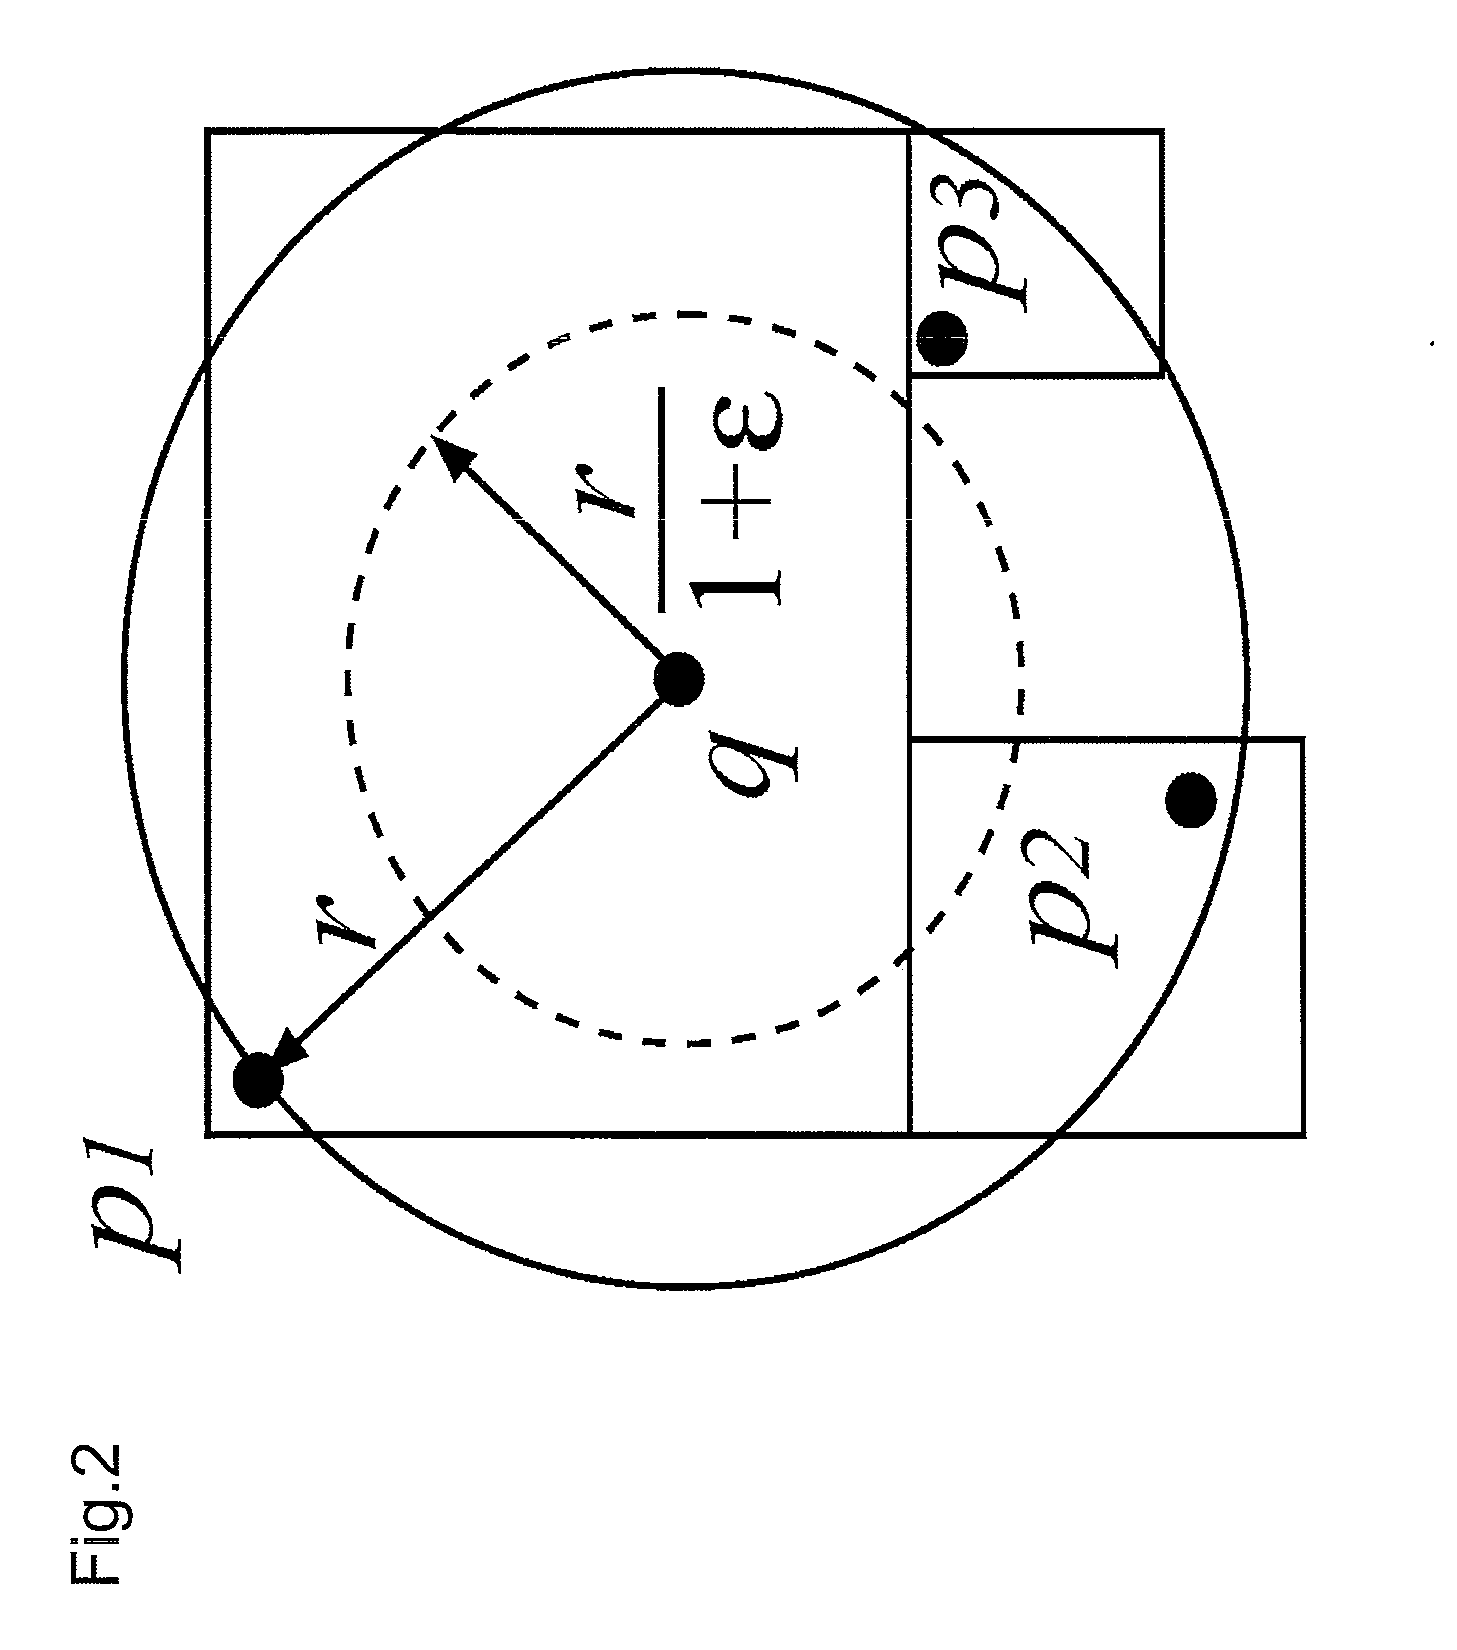 Image recognition method, image recognition device, and image recognition program